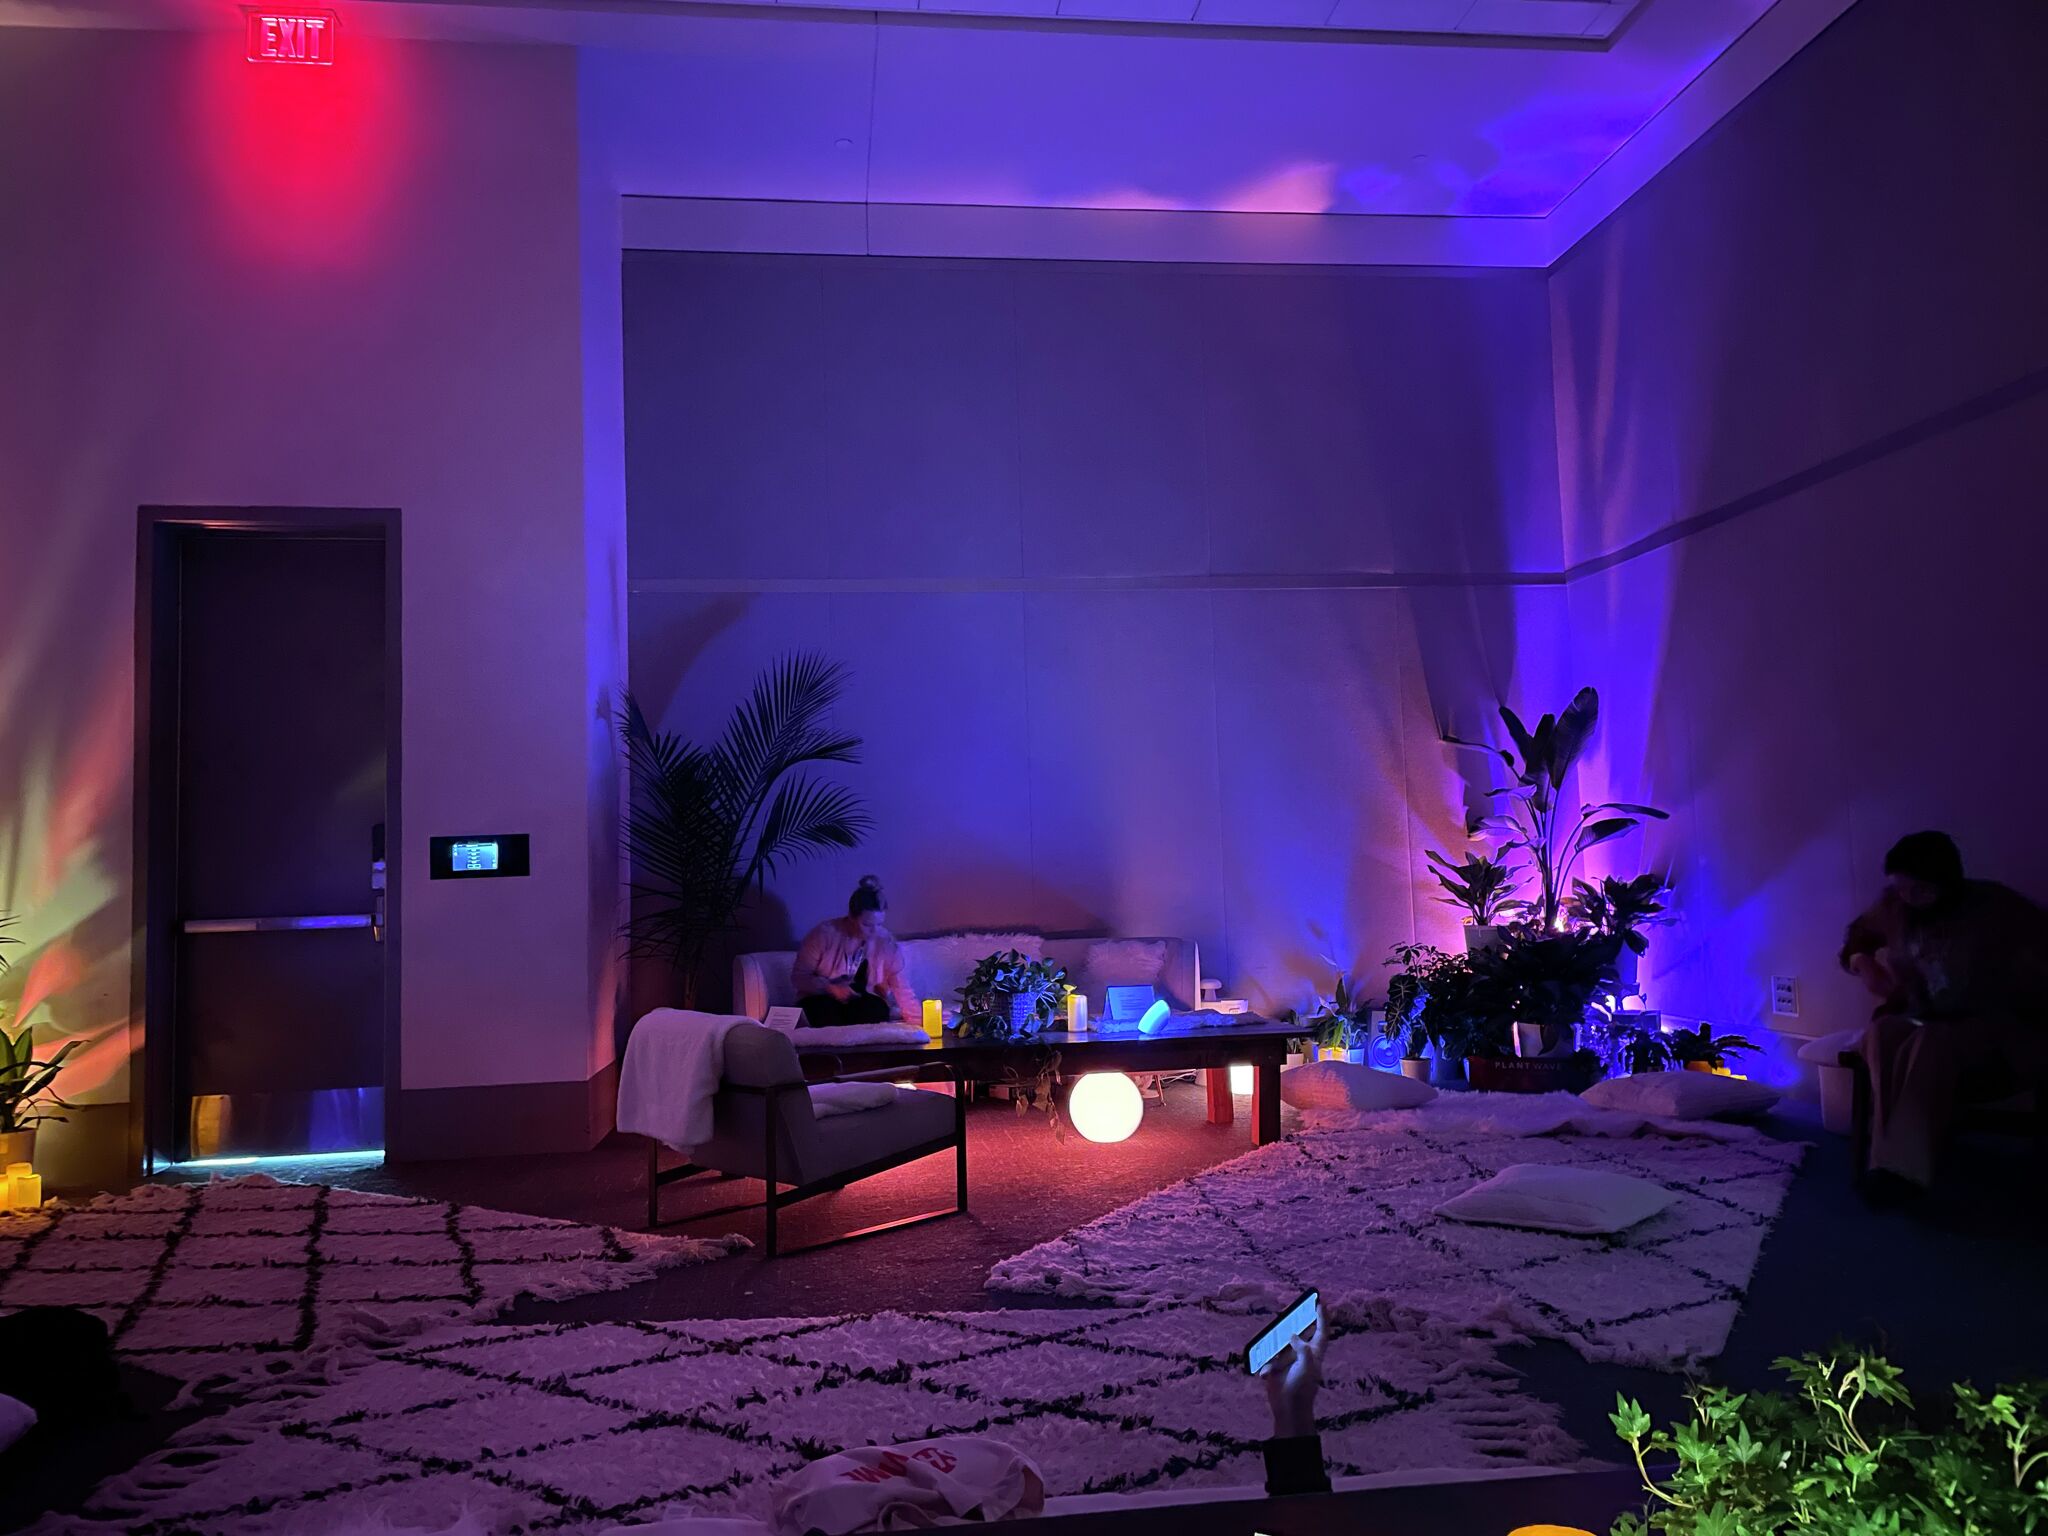 PlantWave creates music from data mined from plants at SXSW